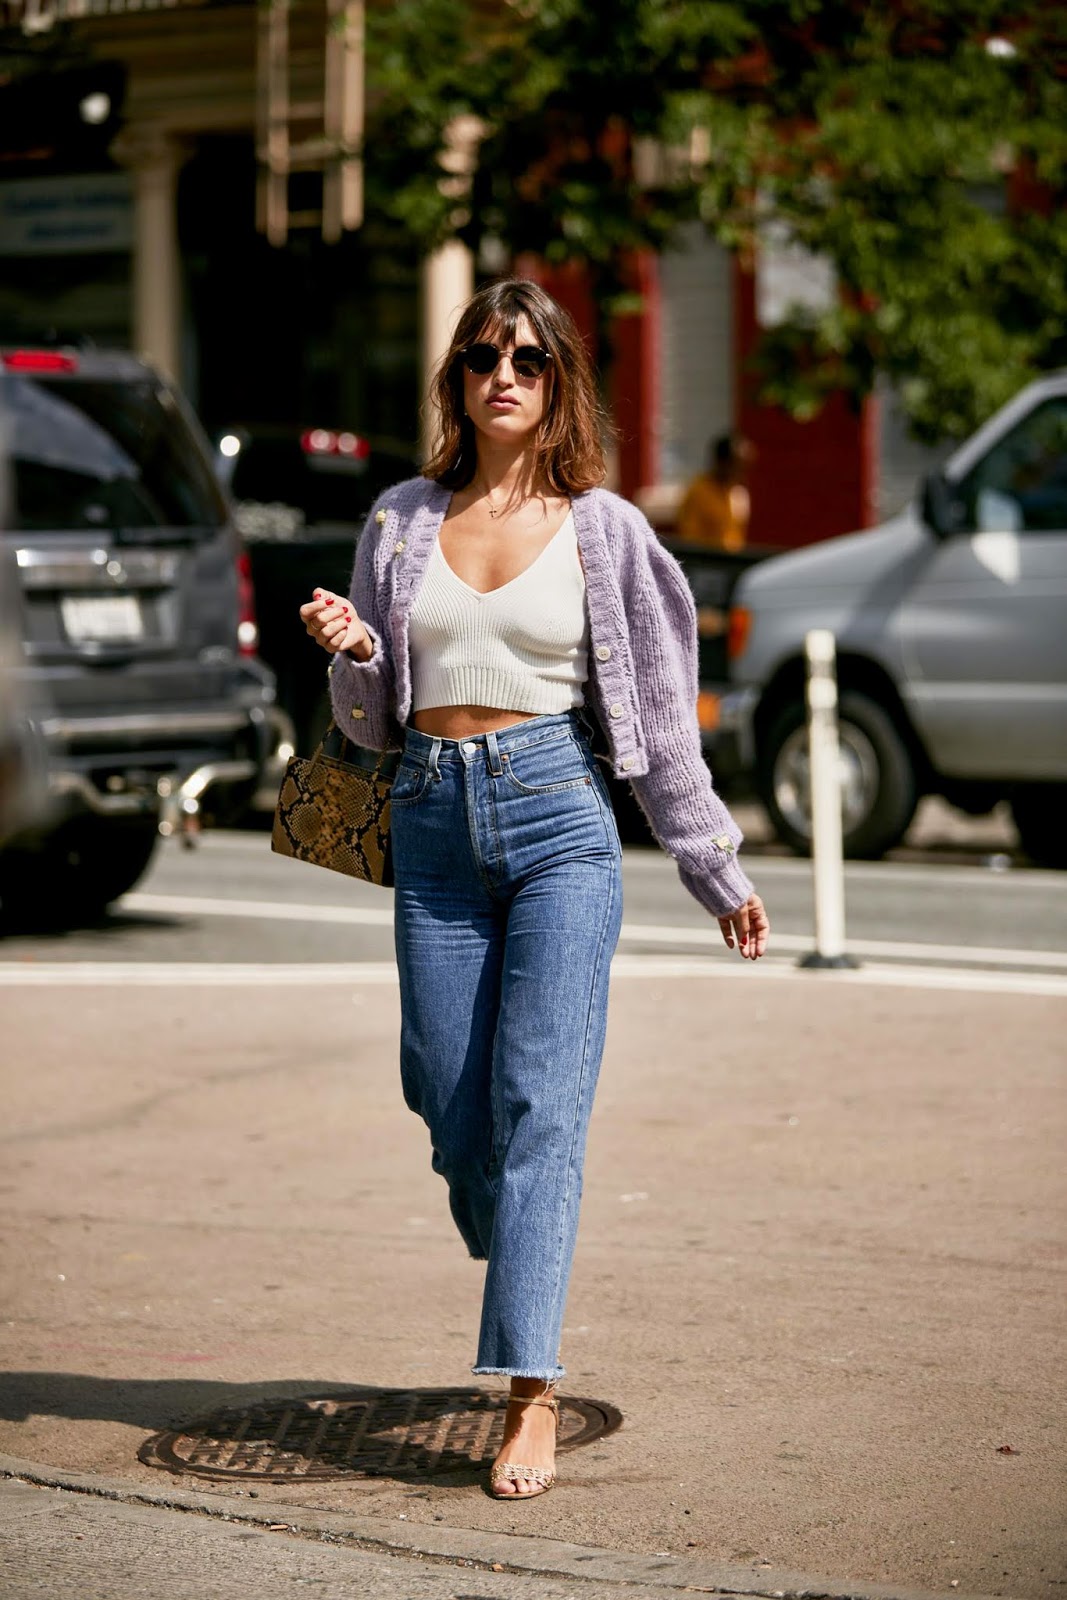 French-Girl Spring Style — Jeanne Damas in a purple cardigan, white tank top, snake-print bag, high-waisted jeans, and sandals 